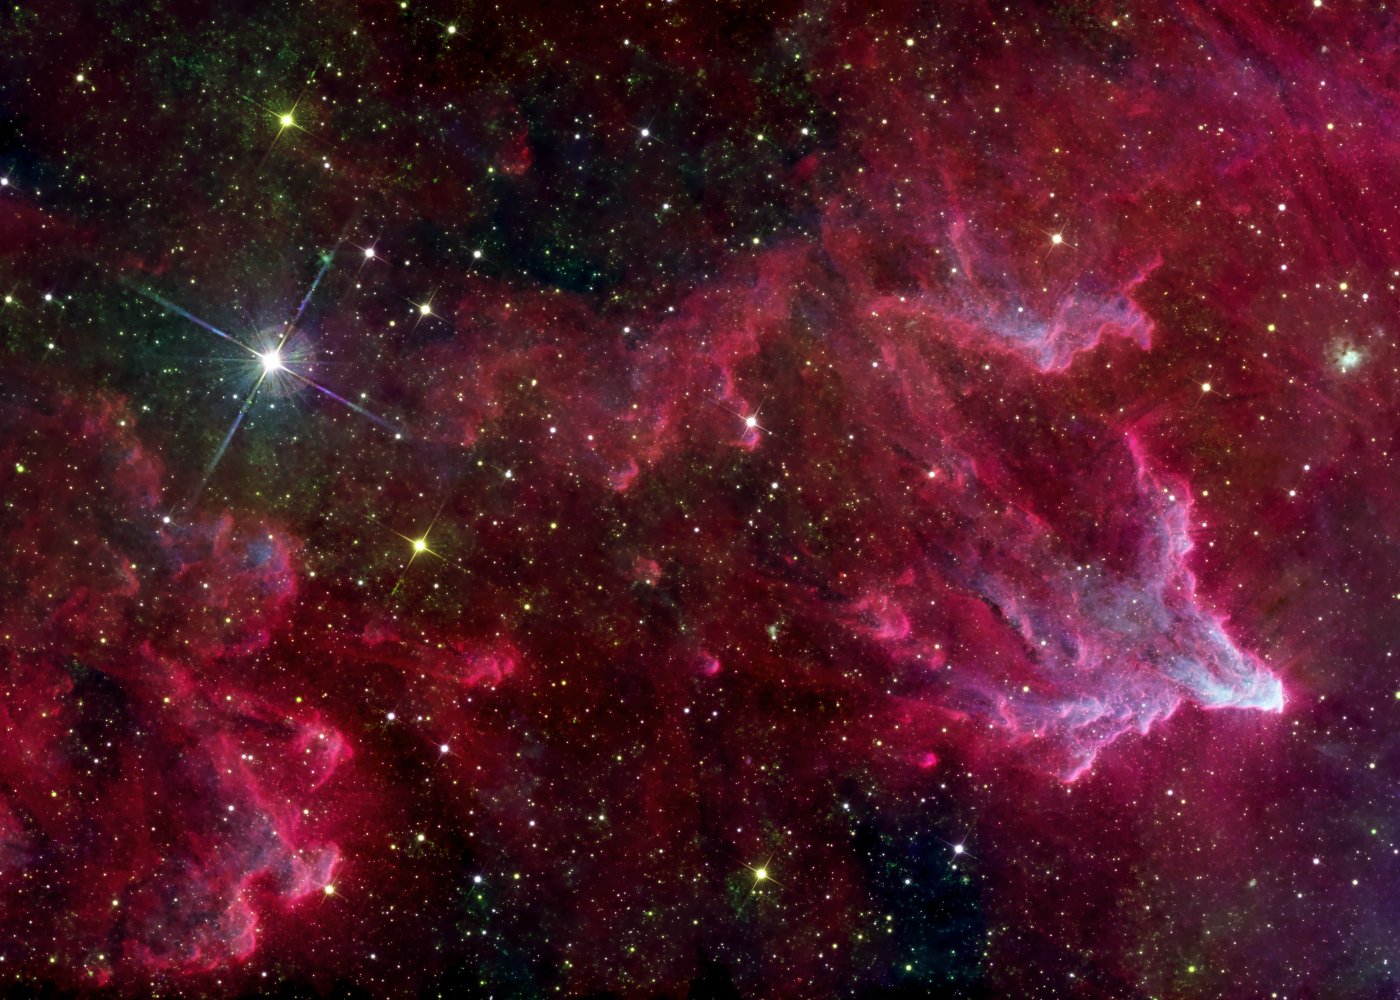 SH2-185 (gam Cas Nebula, Ghost of Cassiopeia) in H-alpha, near infrared and blue